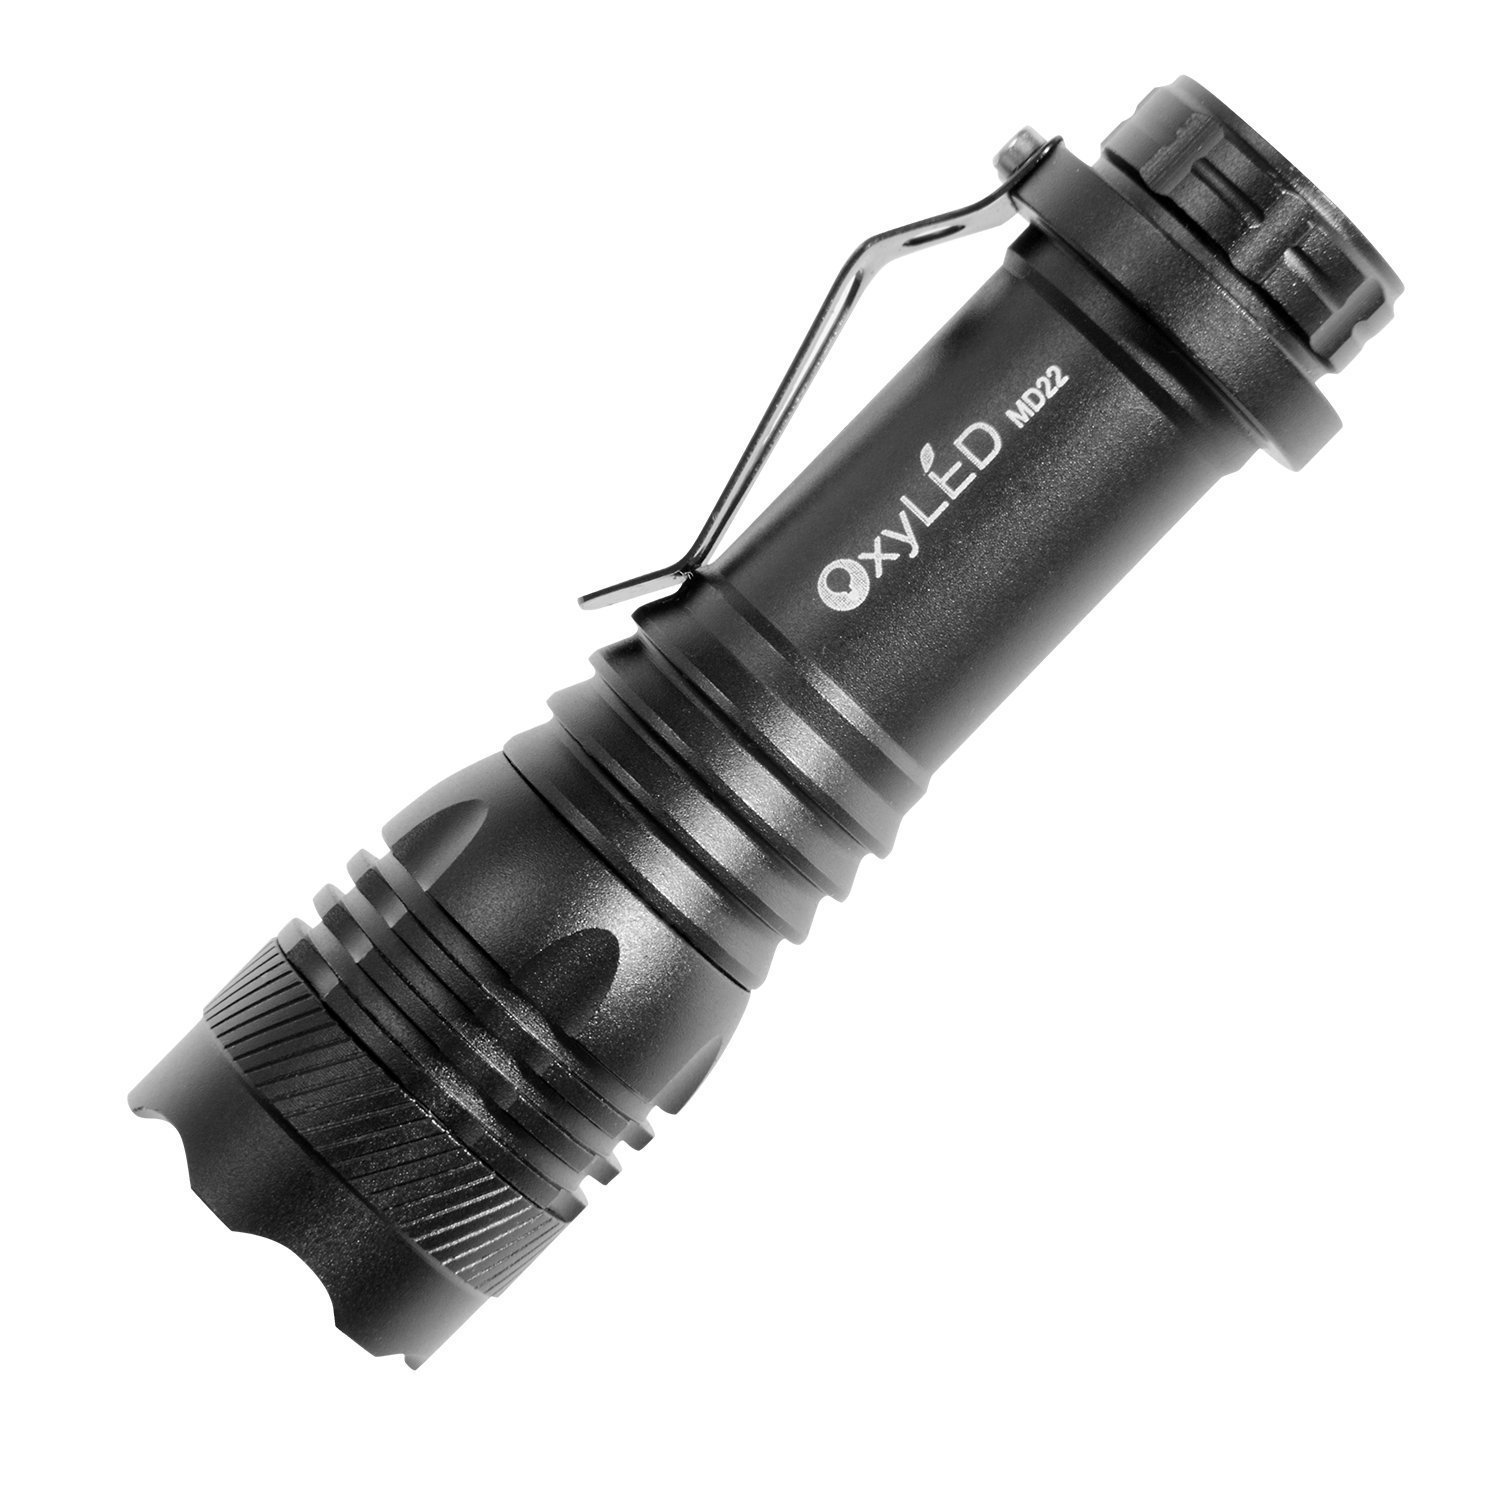 Mini Zoomable Rechargeable LED Flashlight Only $5.99 on Amazon!